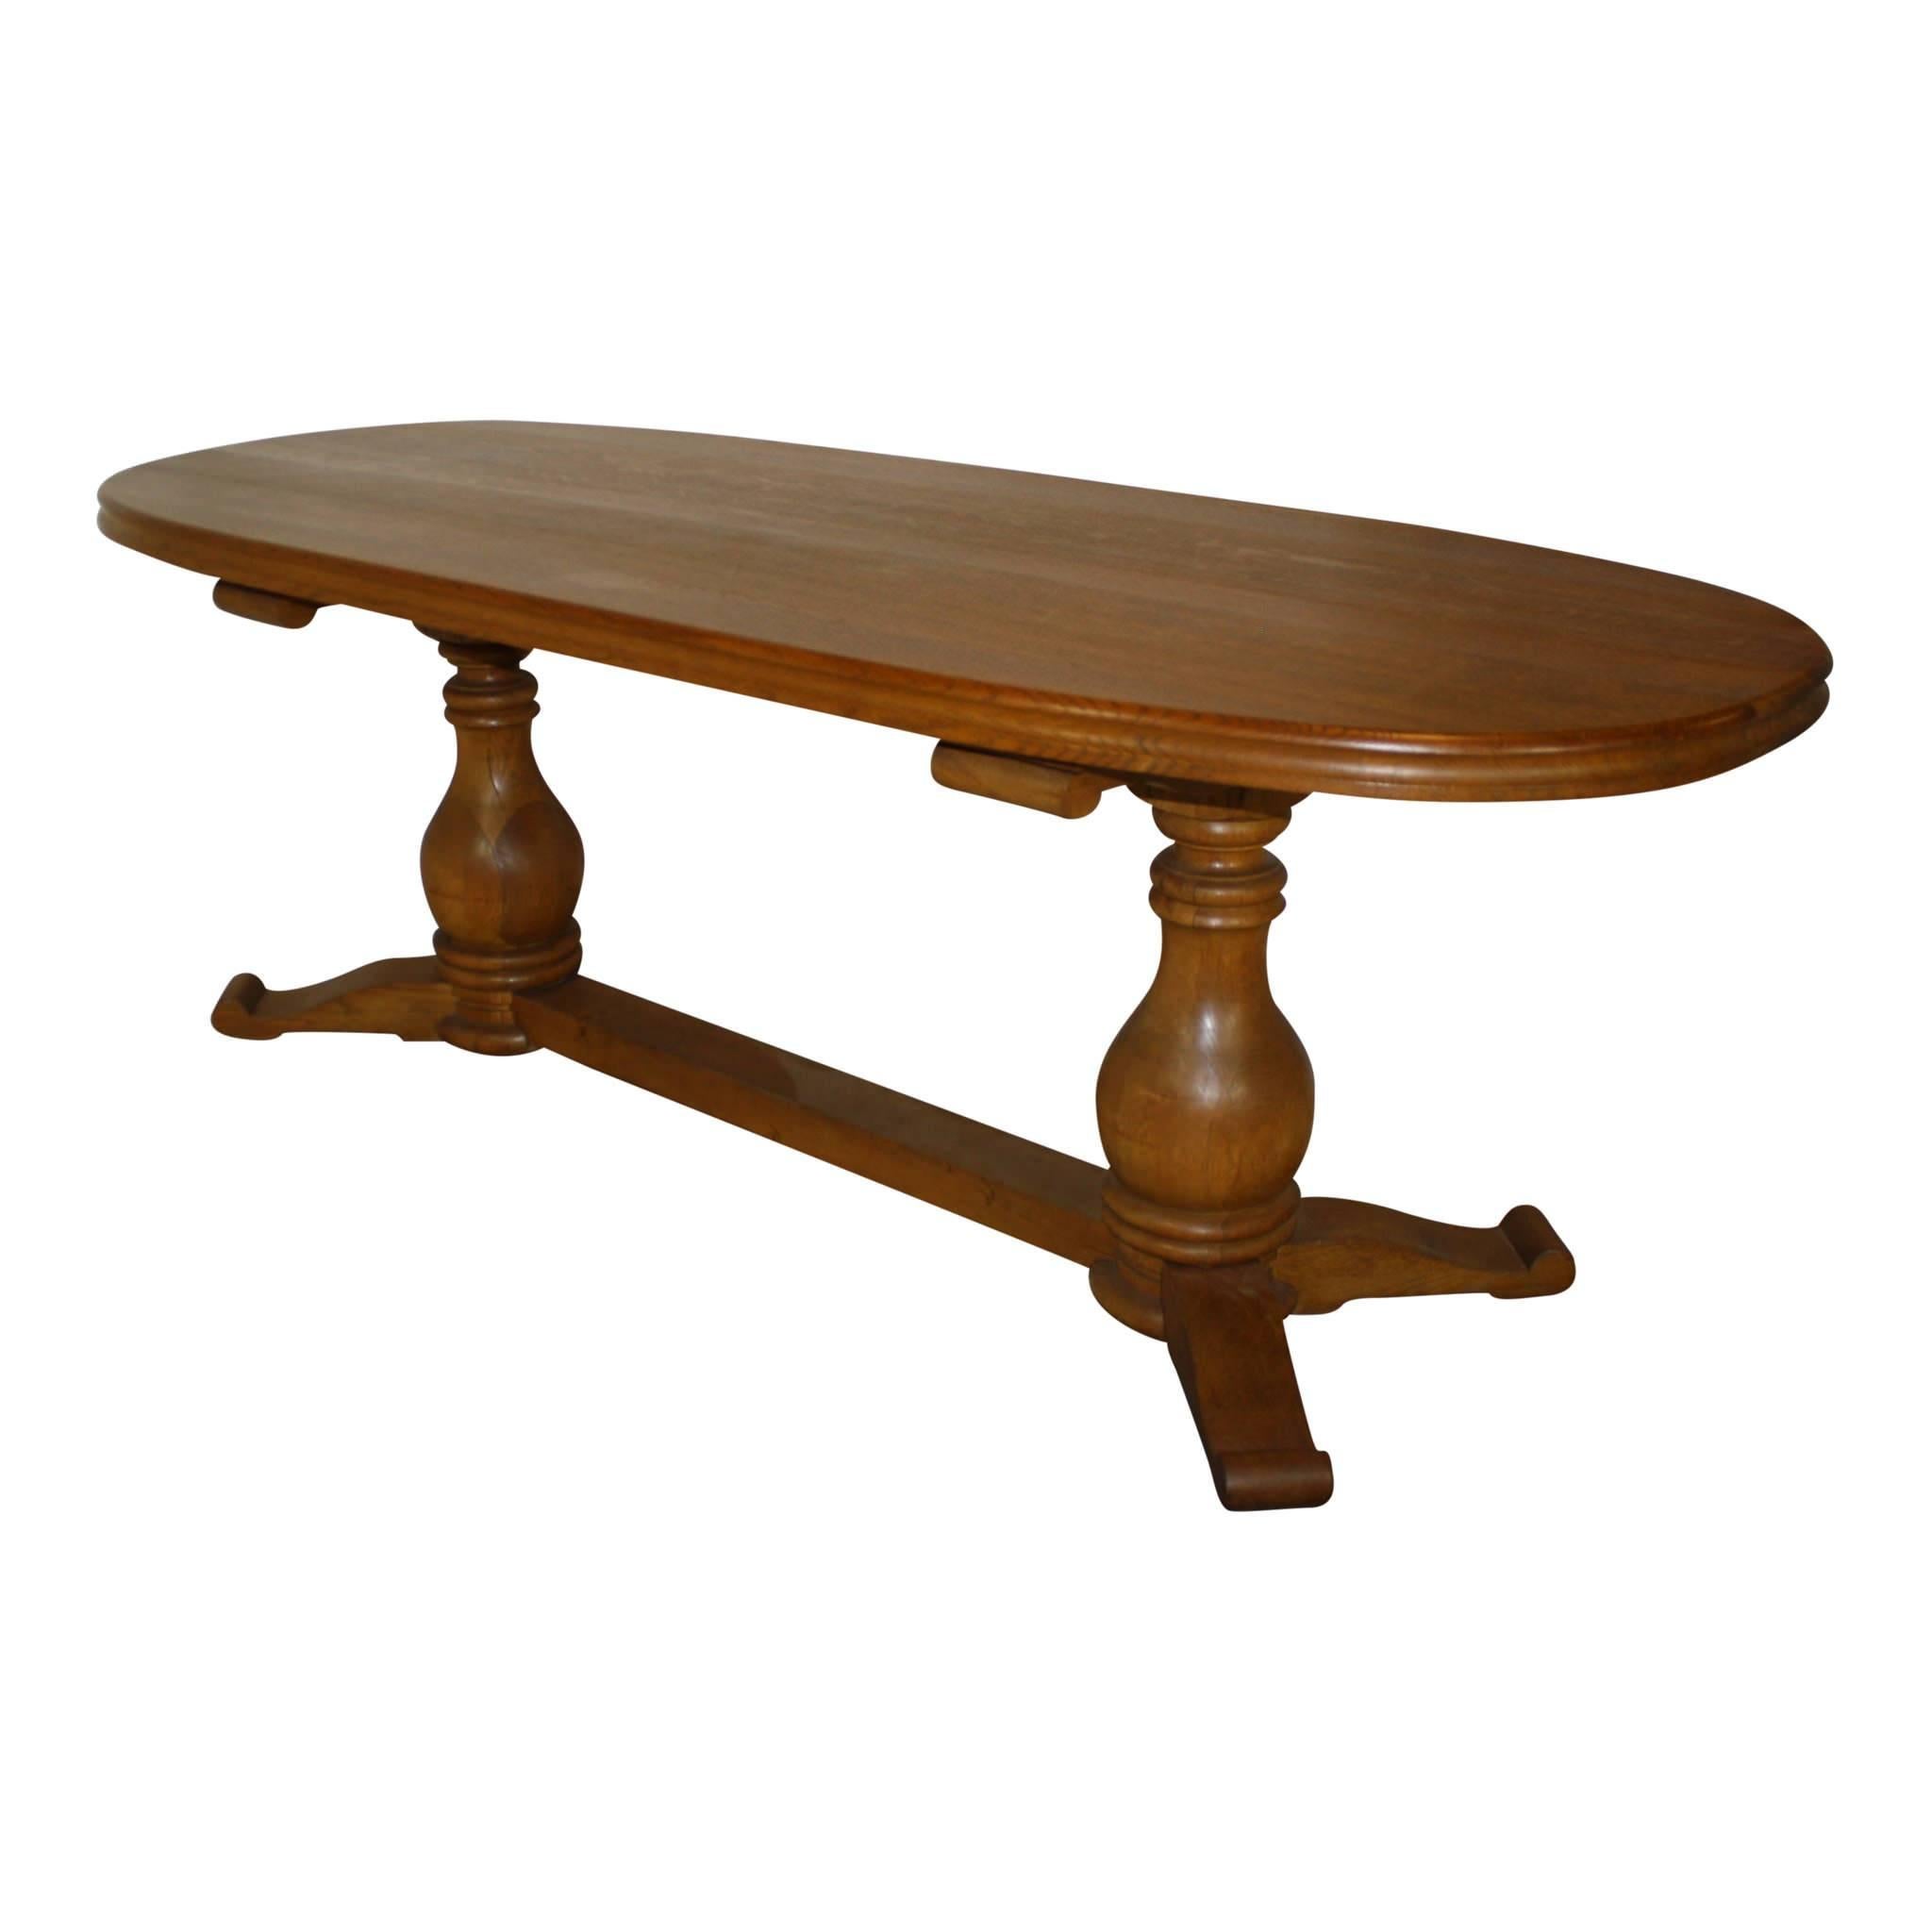 Crafted of oak, this oval Belgian table is ideal for casual or formal dining. The substantial, solid, two inch table top has the pattern of flecking and tight grain unique to quartersawn oak. The robust, double, pedestal table legs are united by a